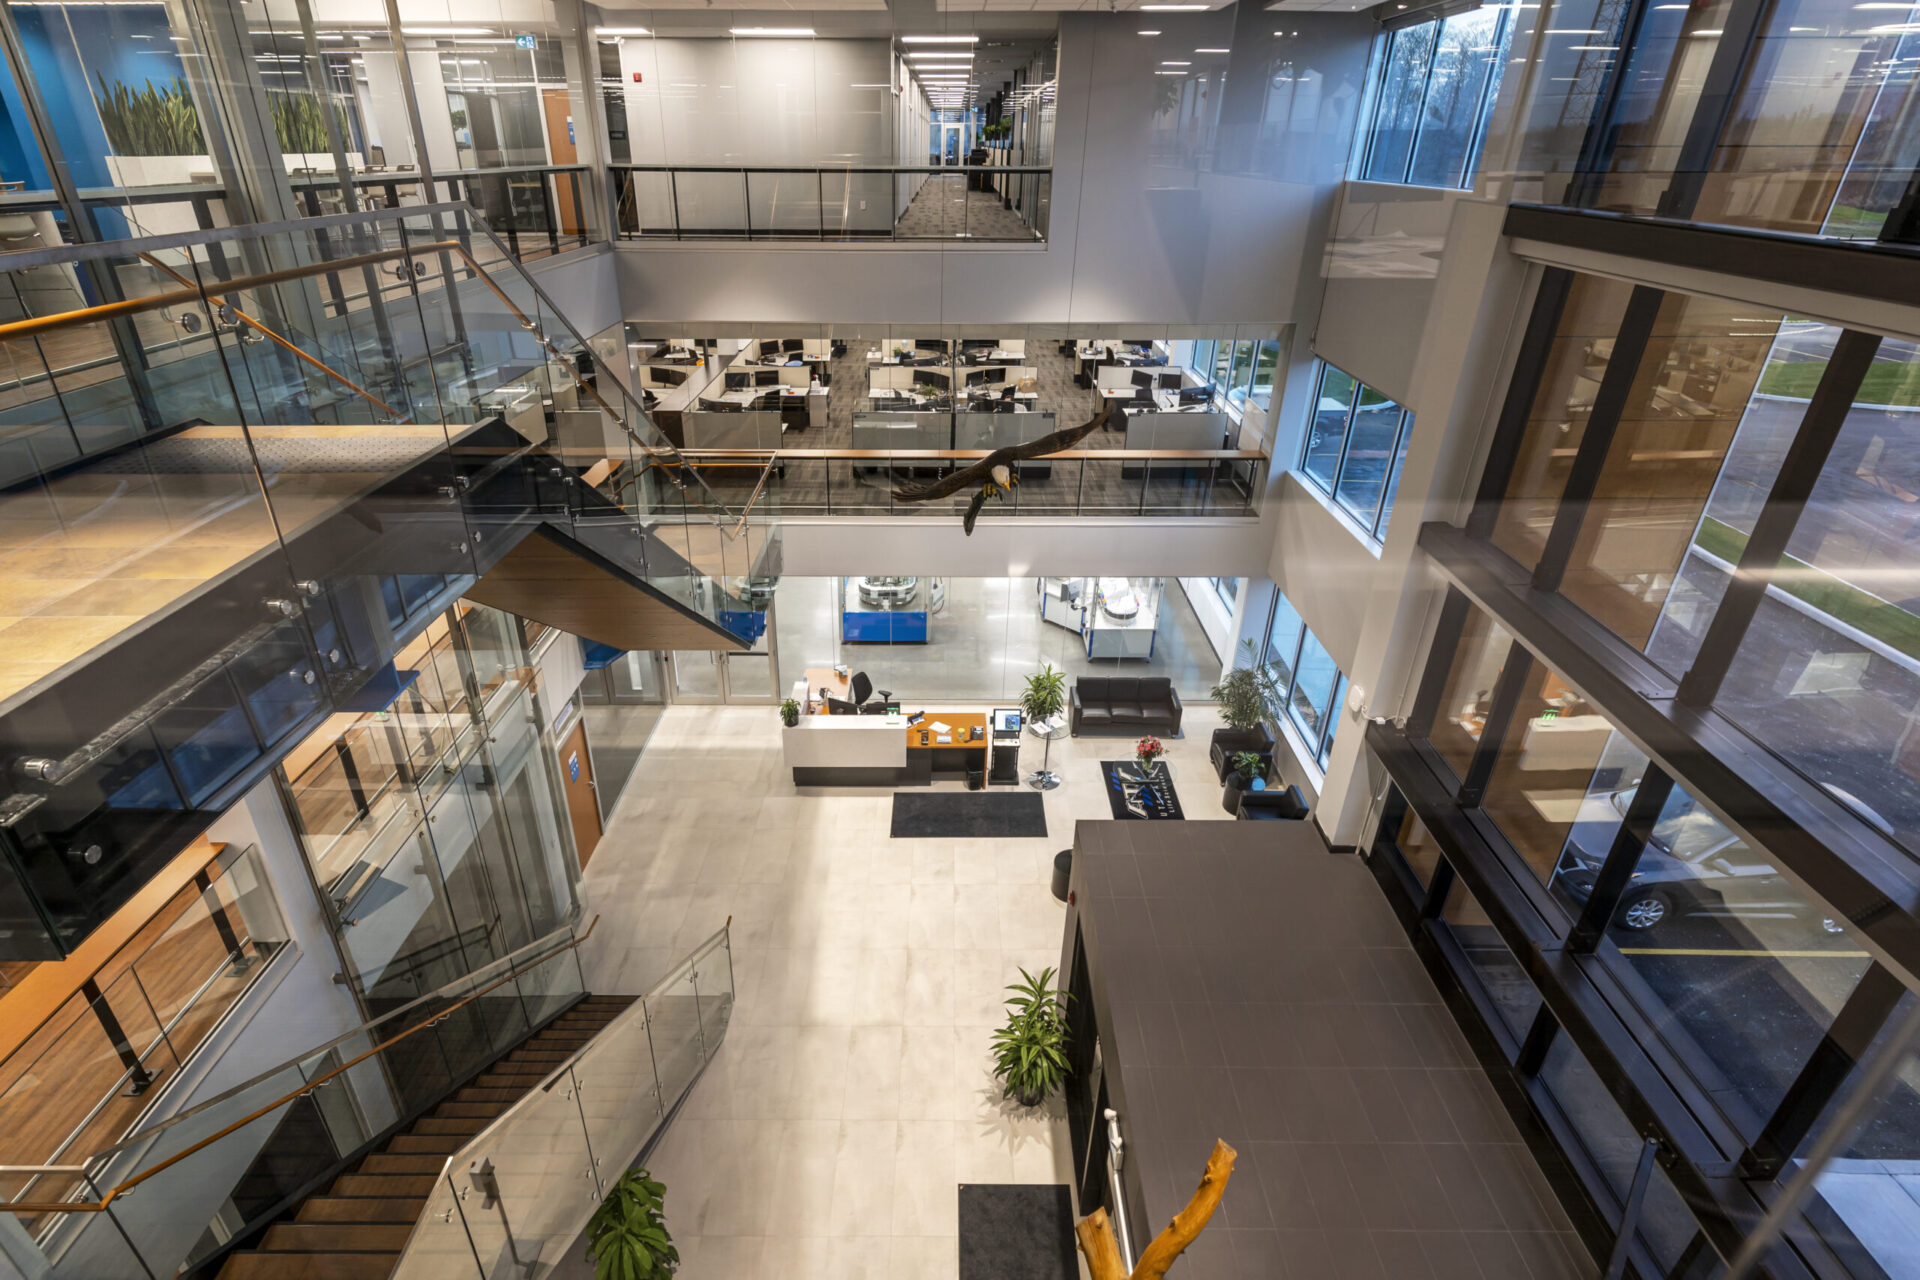 An architecturally stunning office building featuring glass walls and stairs.